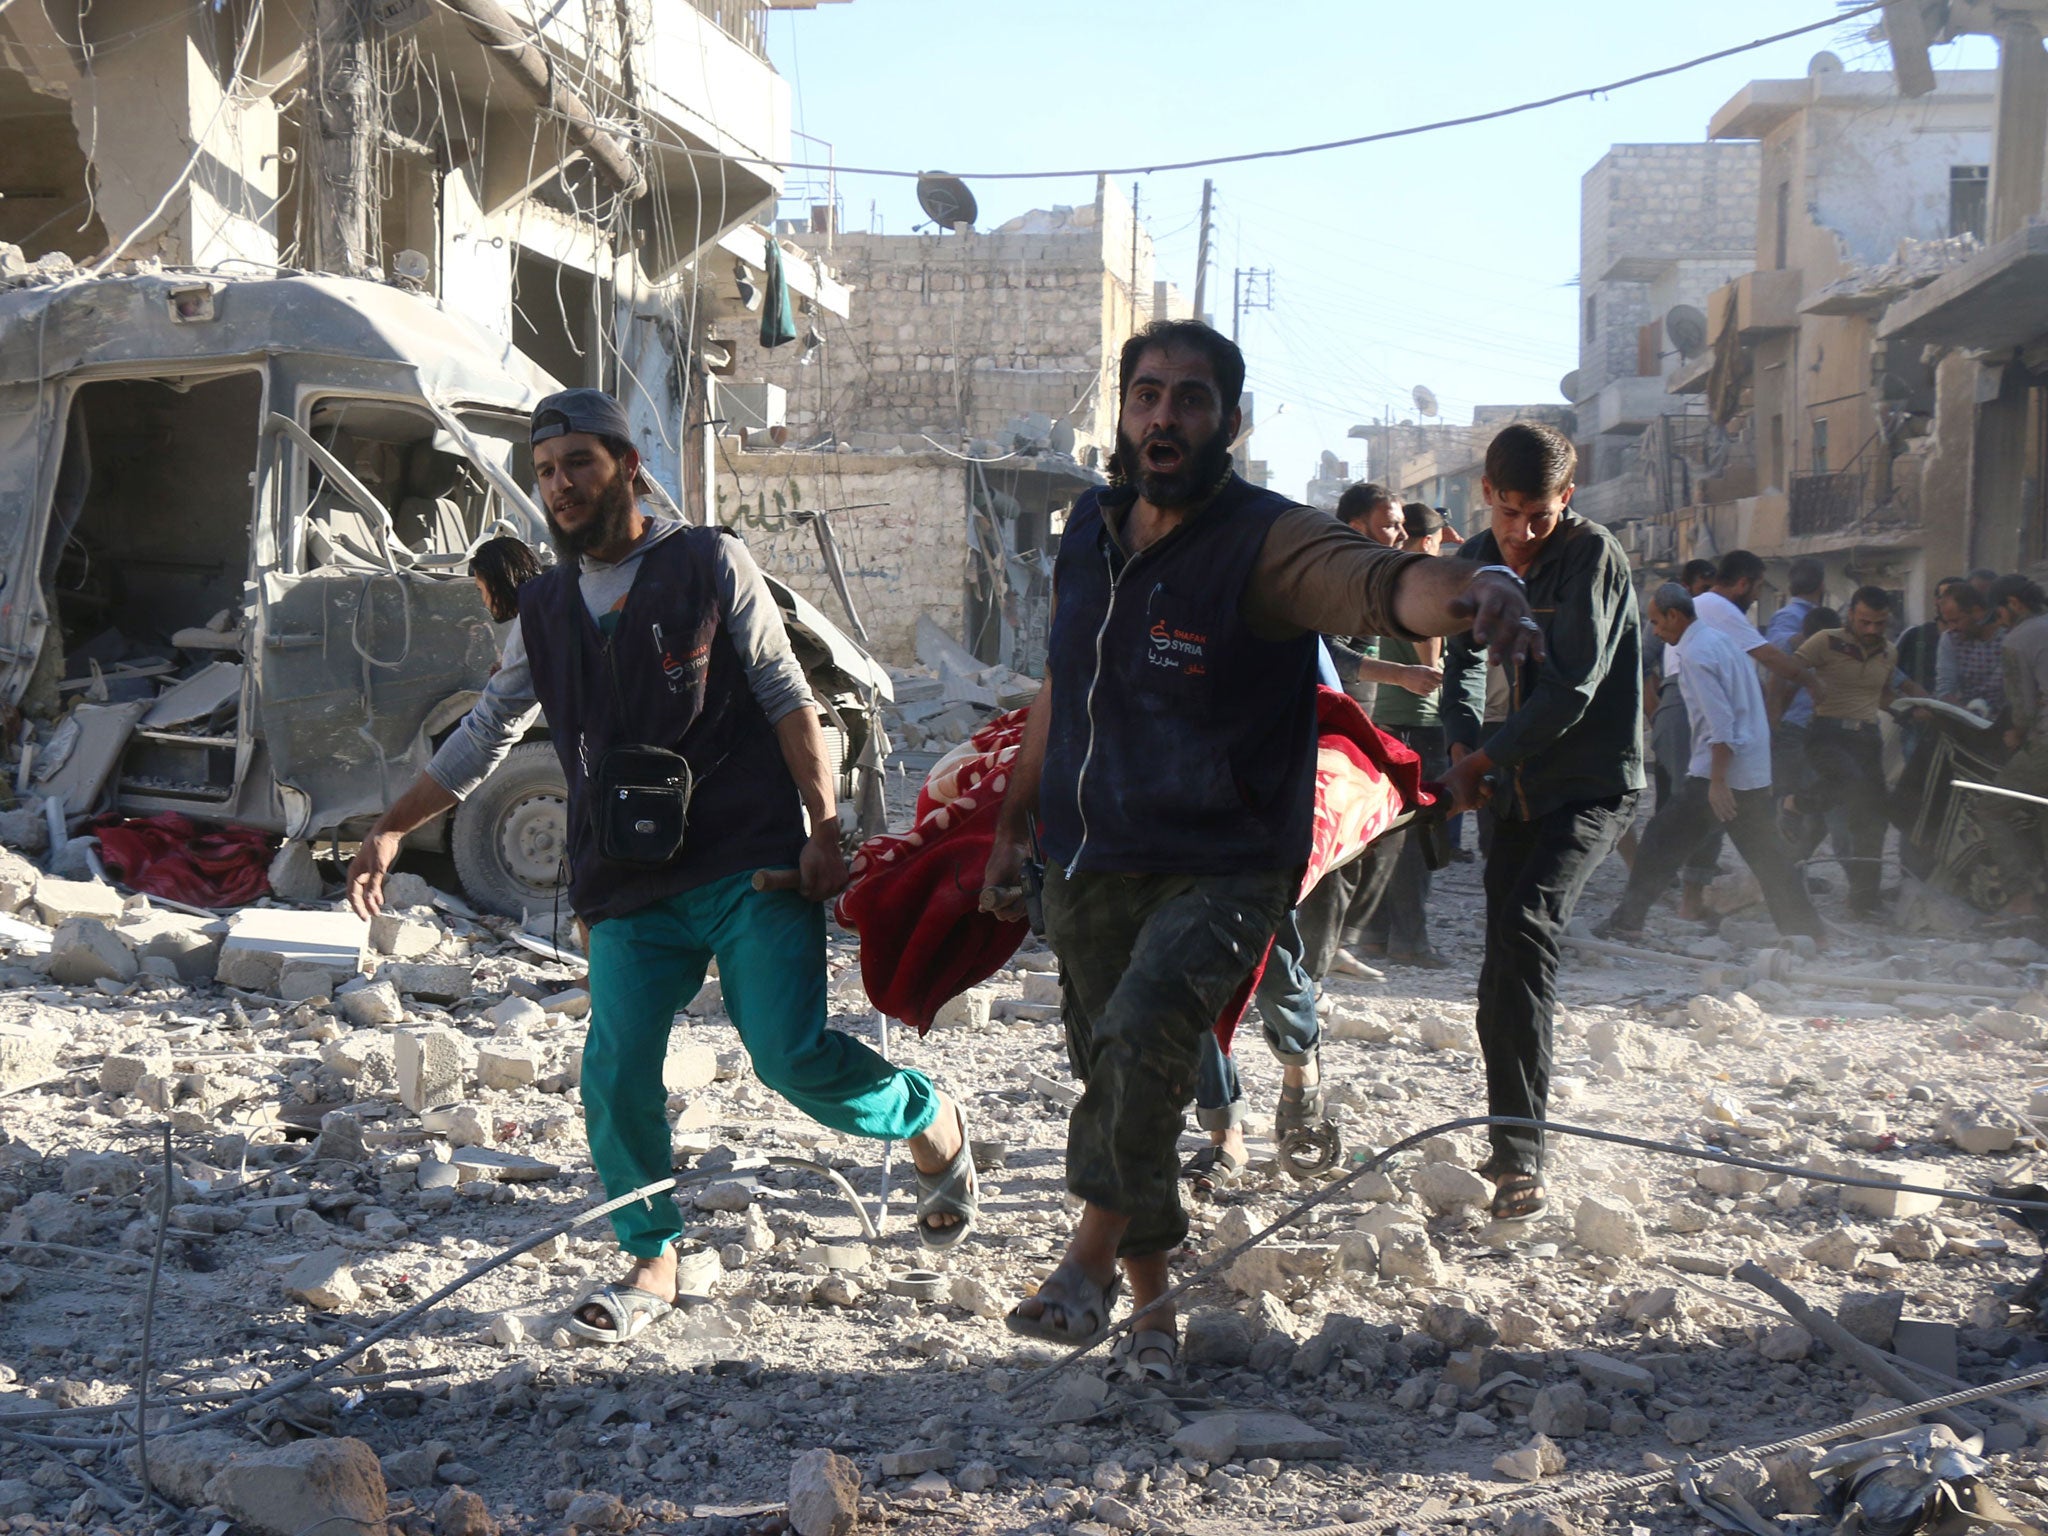 Volunteers carry an injured person after an air strike in Aleppo